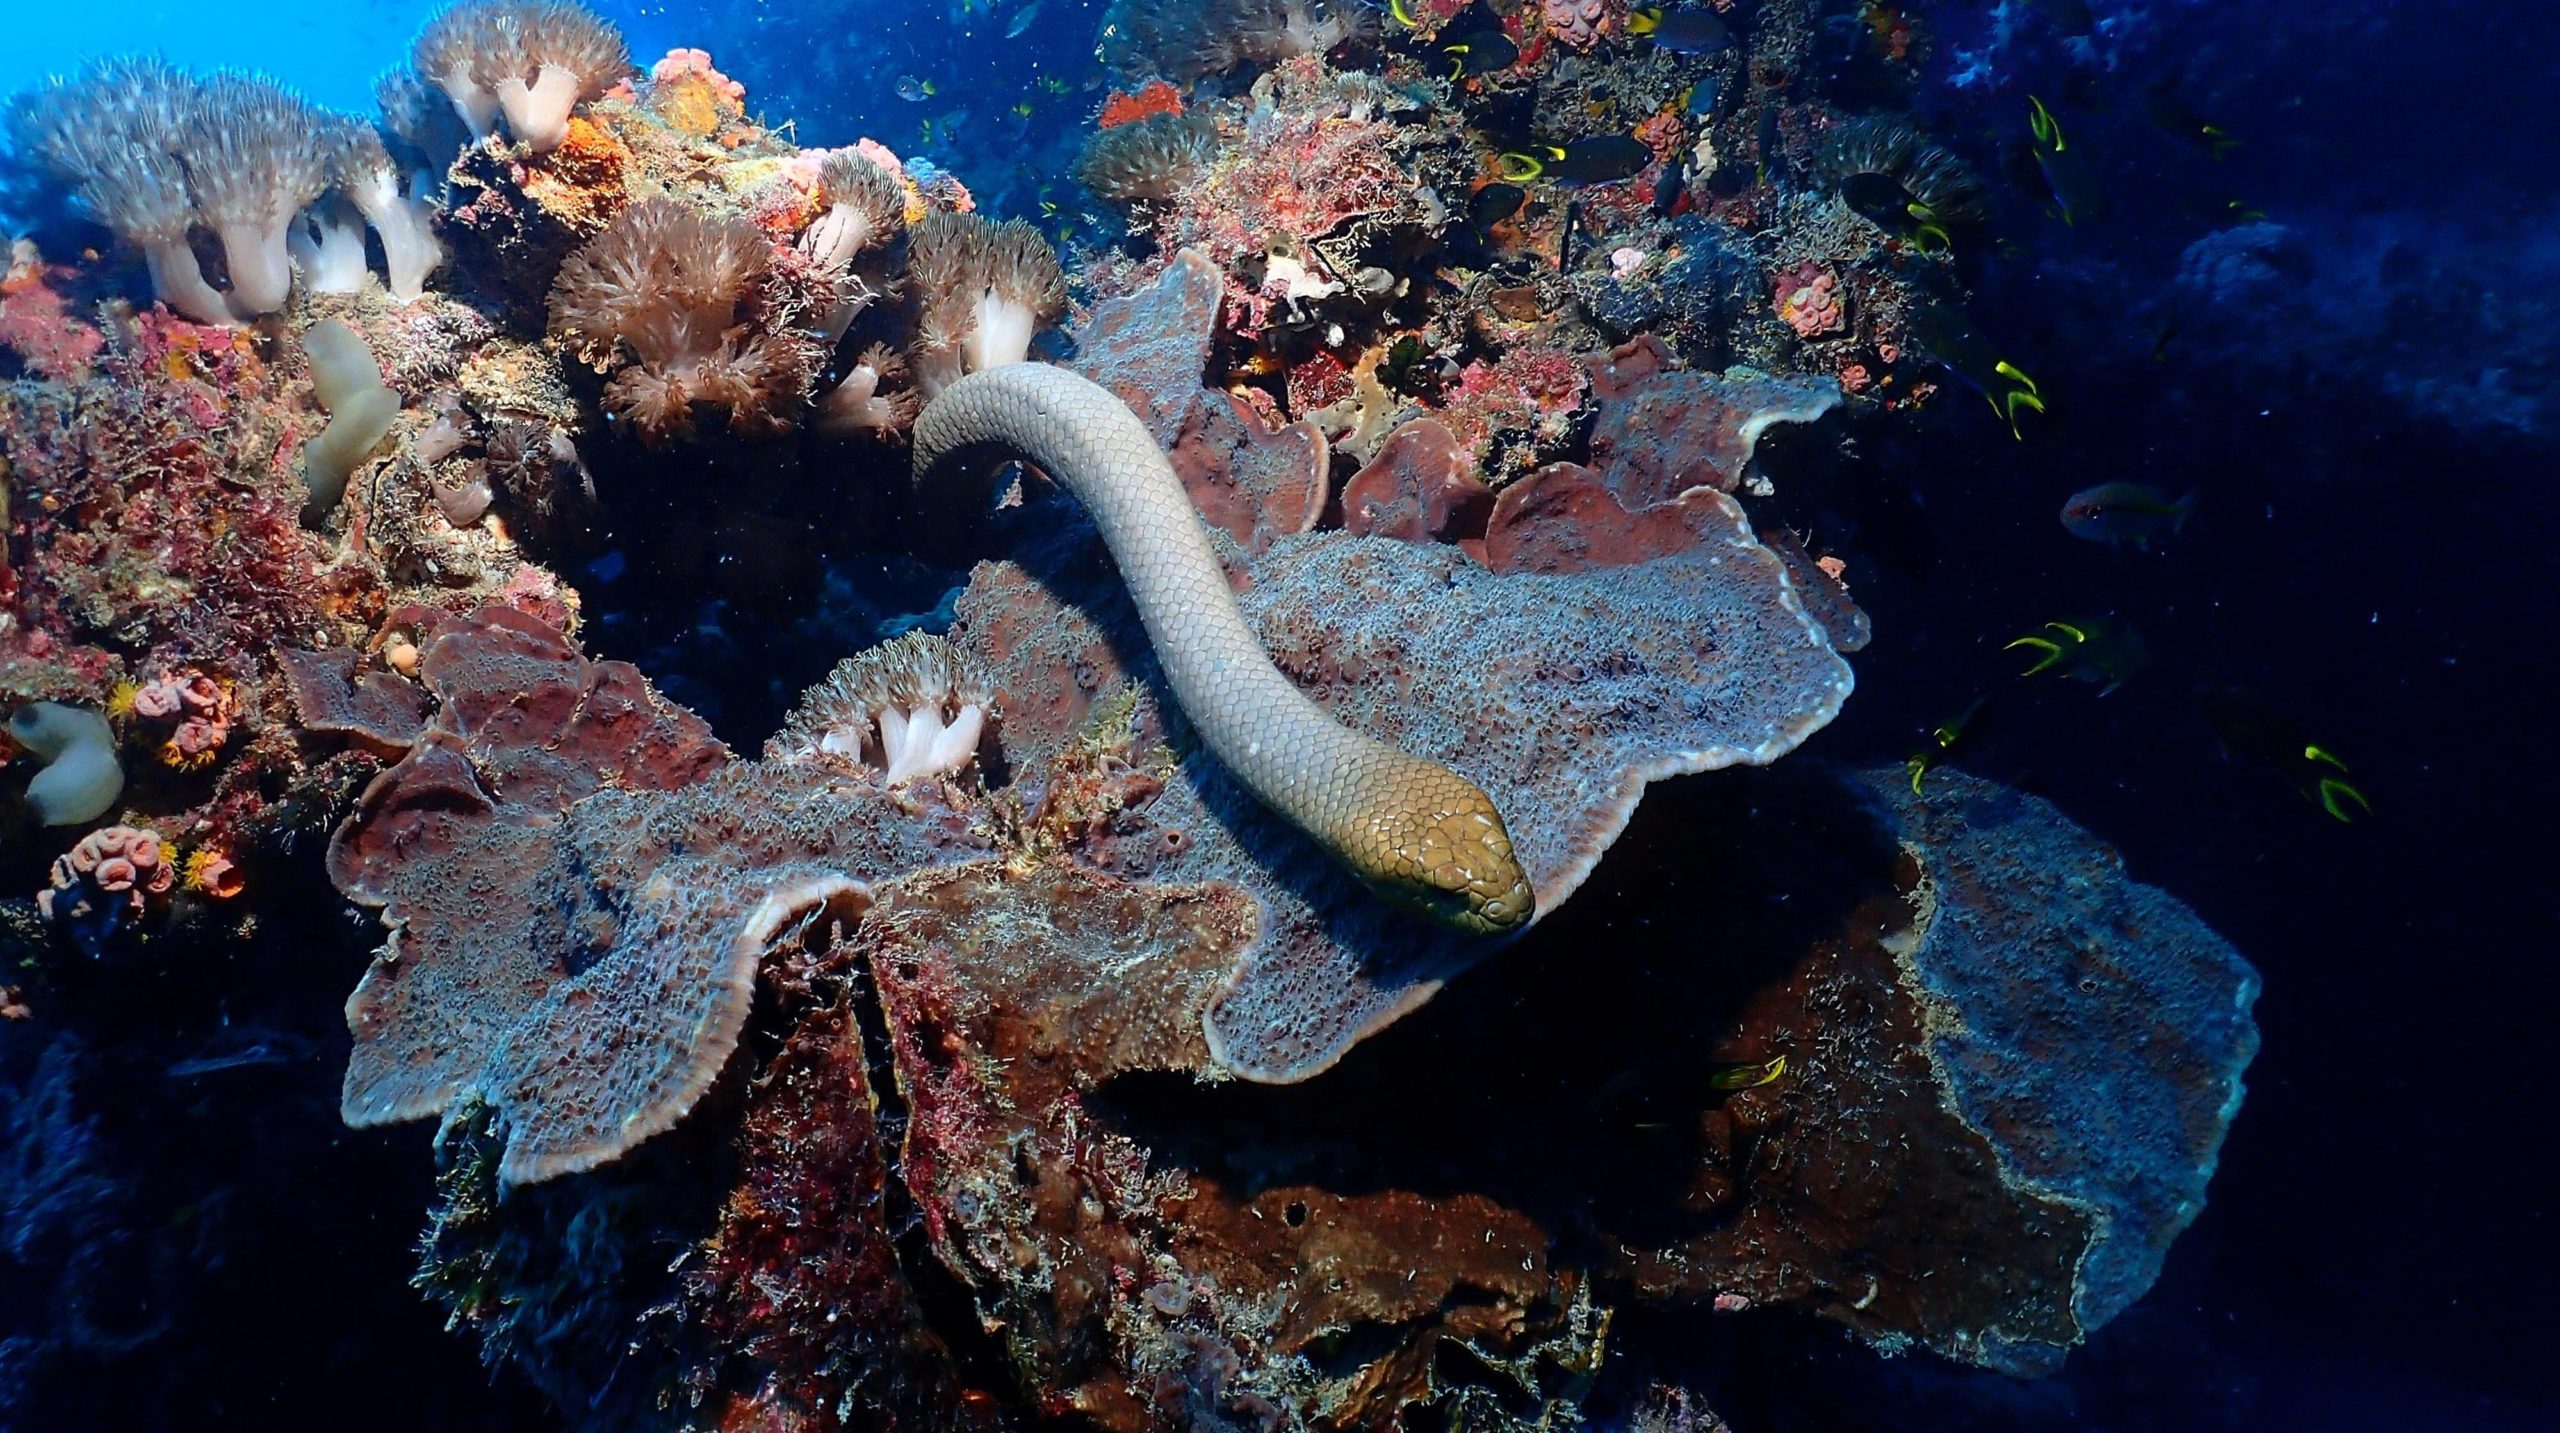 Olive sea snakes are among the largest marine snake species and prefer coral-reef areas. (Image: Jack Breedon)